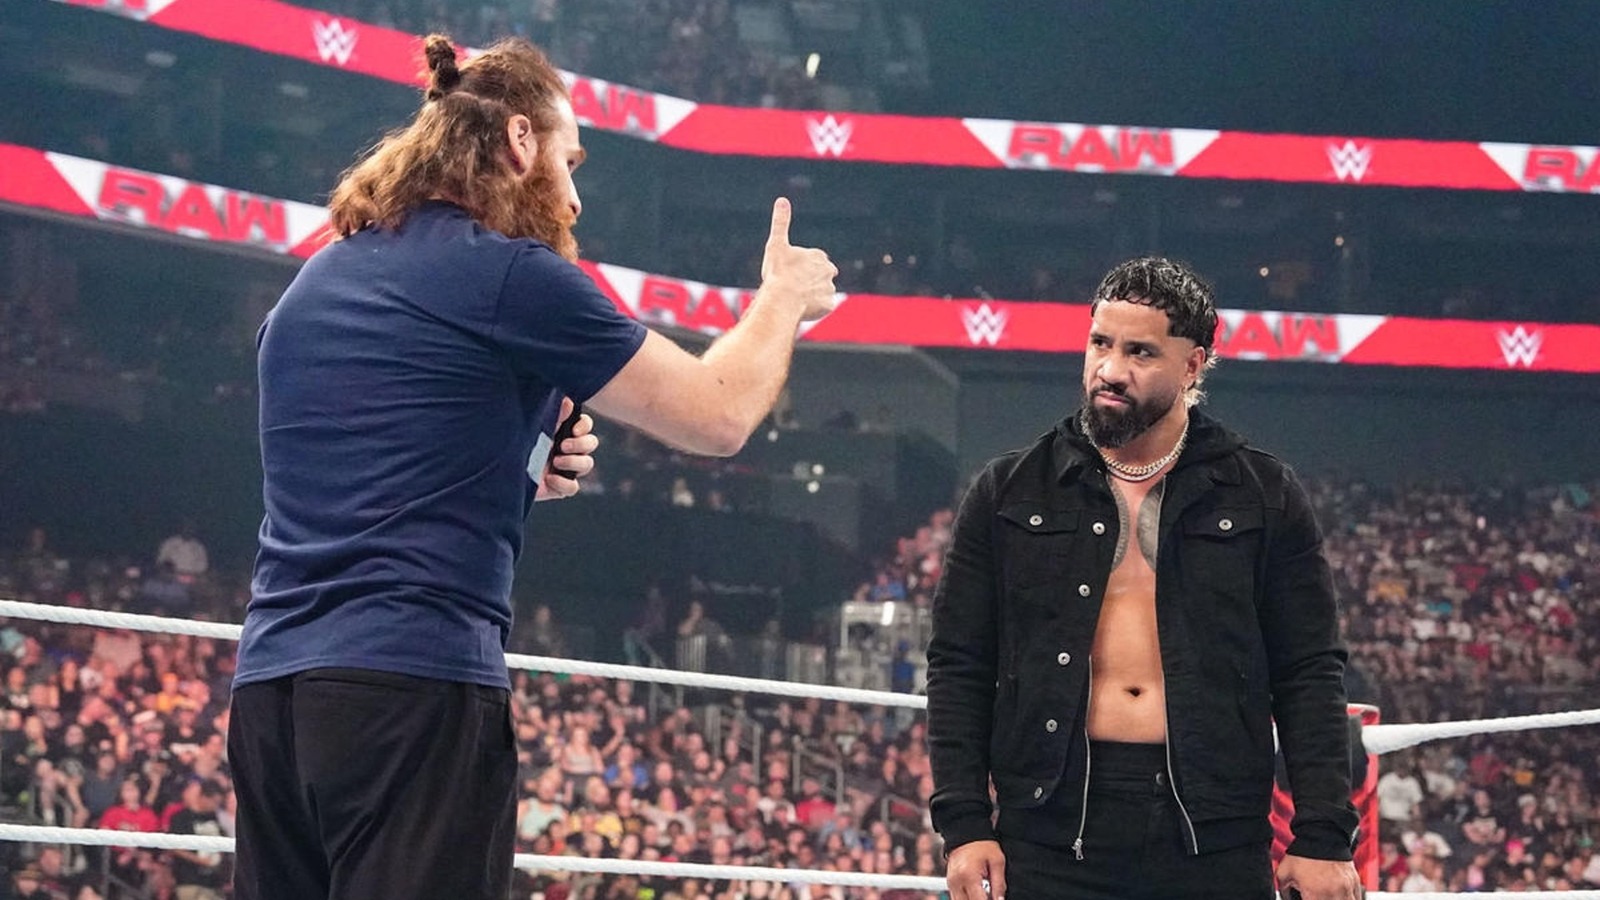 WWE Raw Ratings Remain Steady For Post-Payback Show